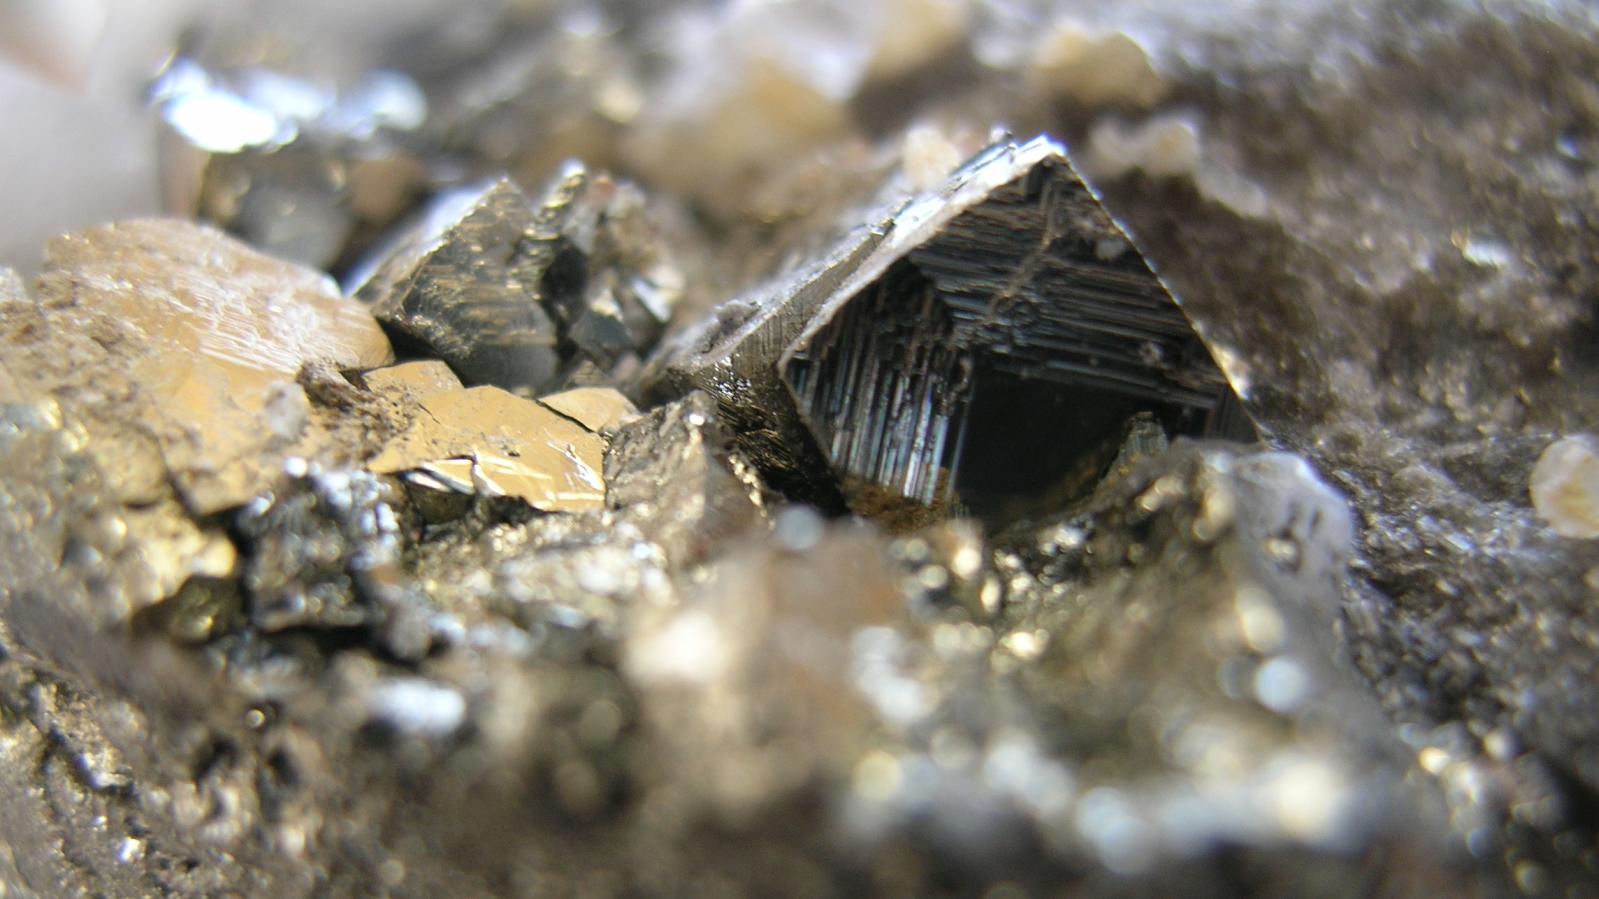 2009 Drill core mineralization from the Sphinx Molybdenum Project in Southeastern British Columbia